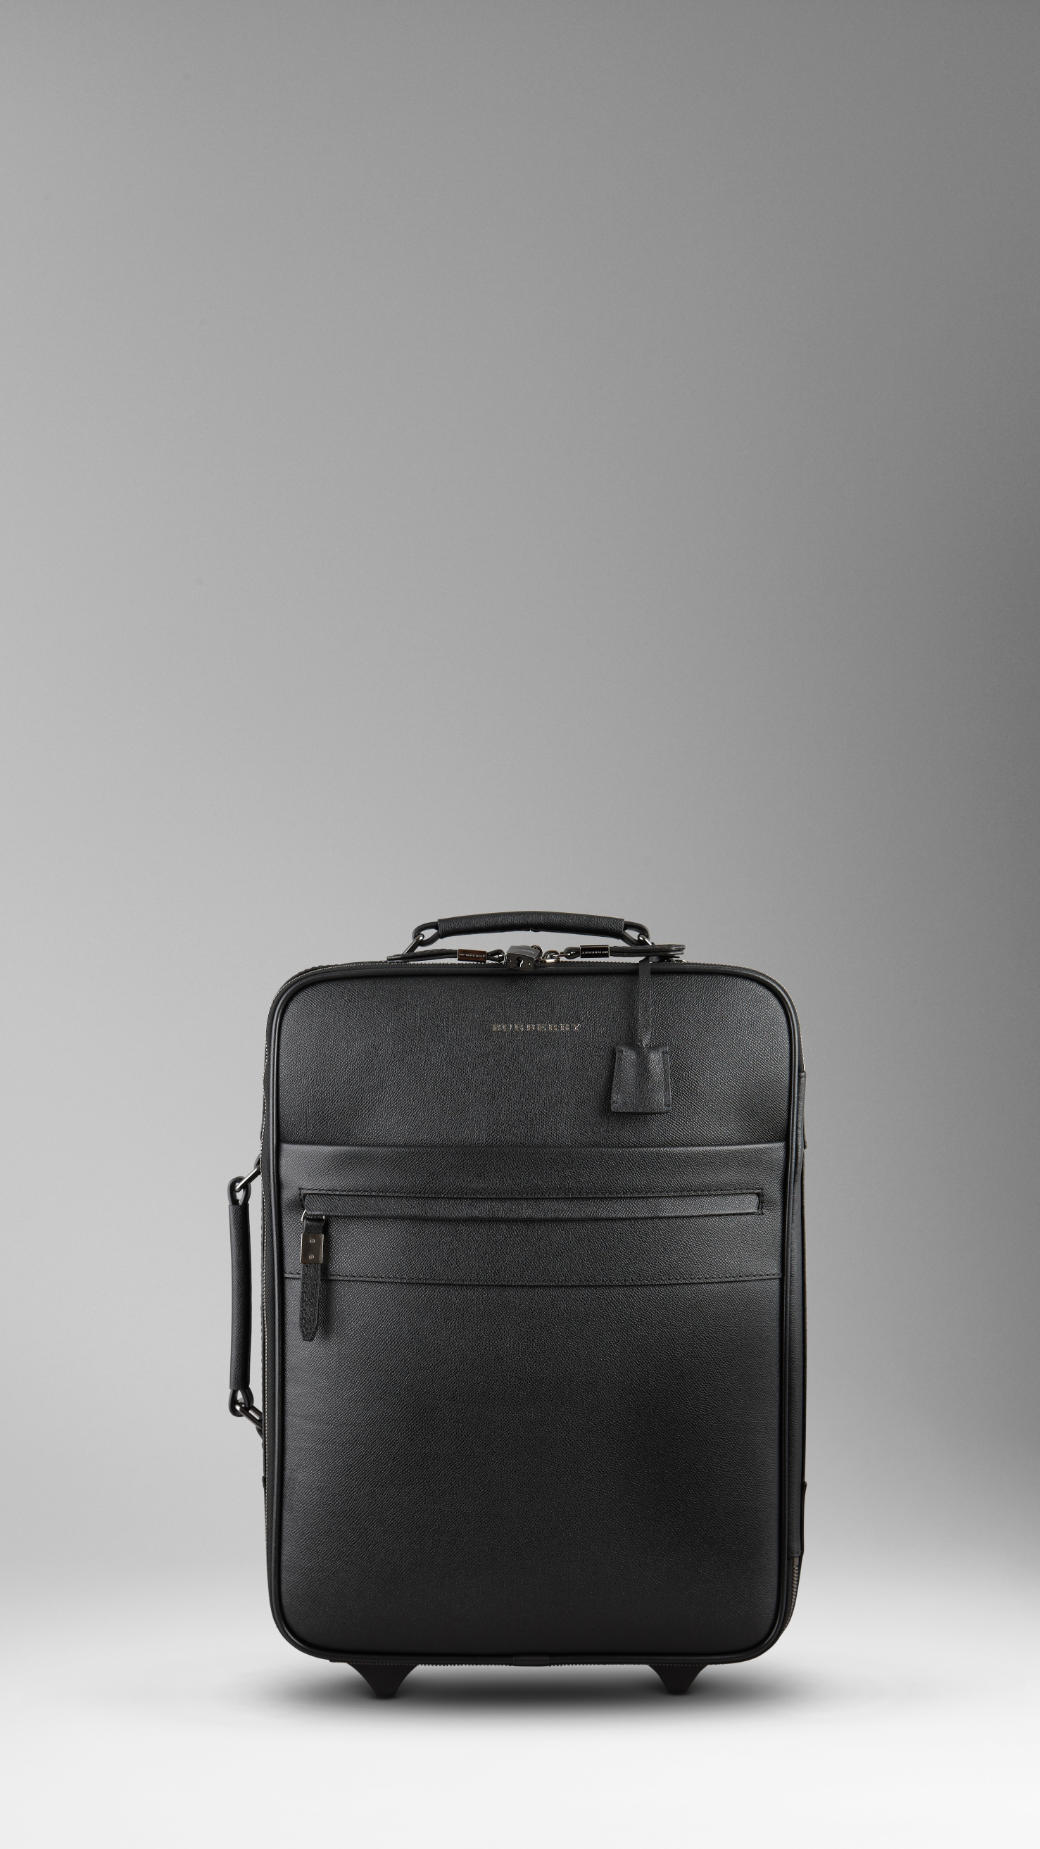 Burberry Leather Carry On Suitcase in Black for Men - Lyst